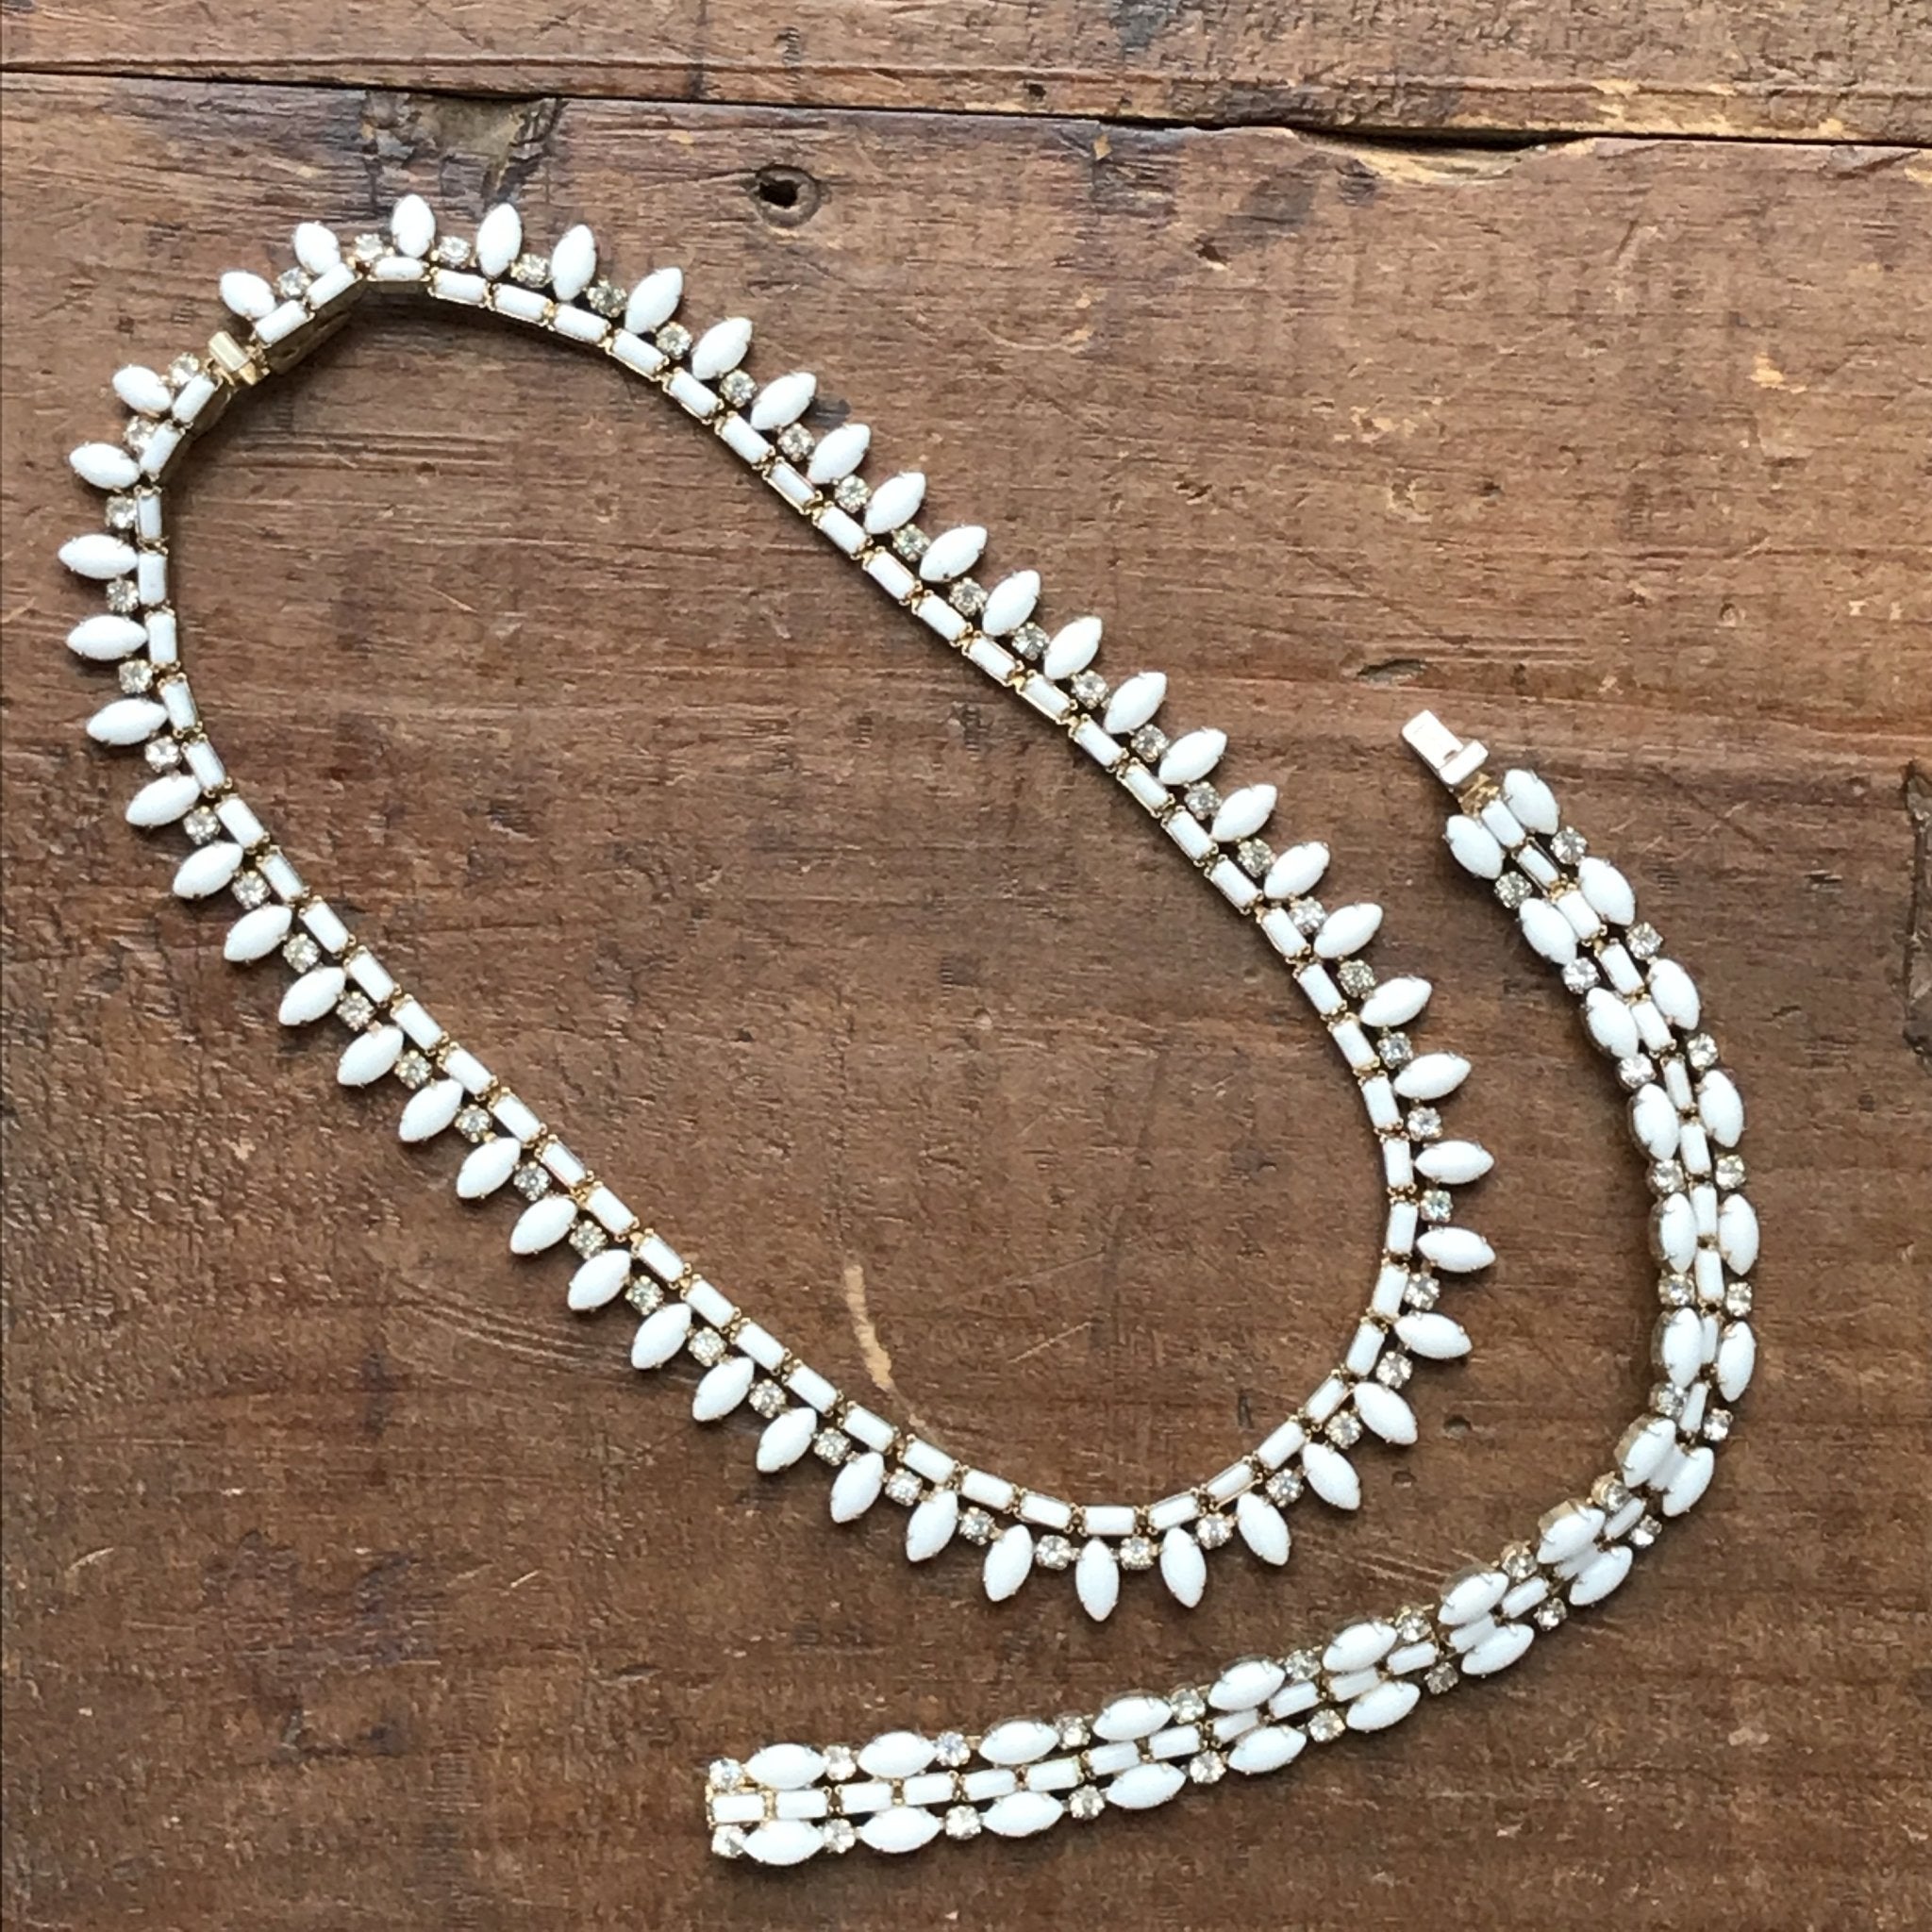 Diamond Necklace And Bracelet Set Available For Immediate Sale At Sotheby's